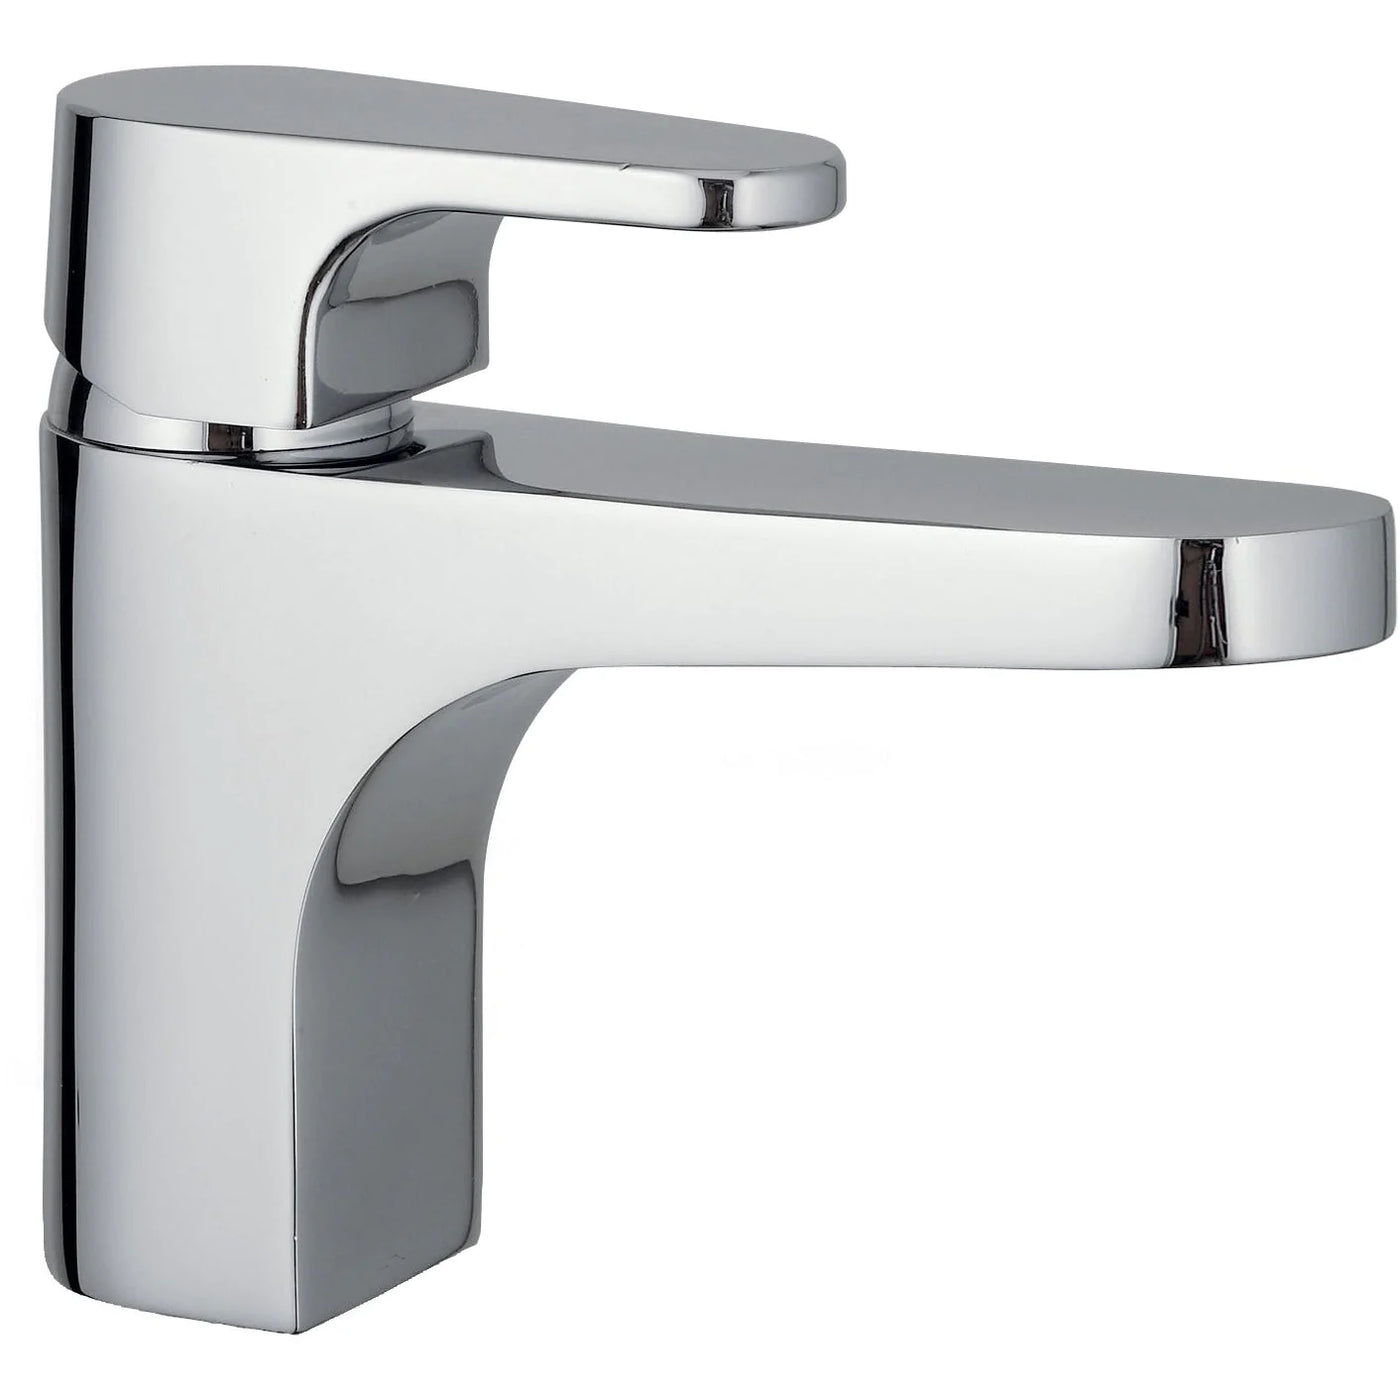 Cleo Single Lever Basin Mixer Tap - Made in Italy - Letta London - Basin Taps